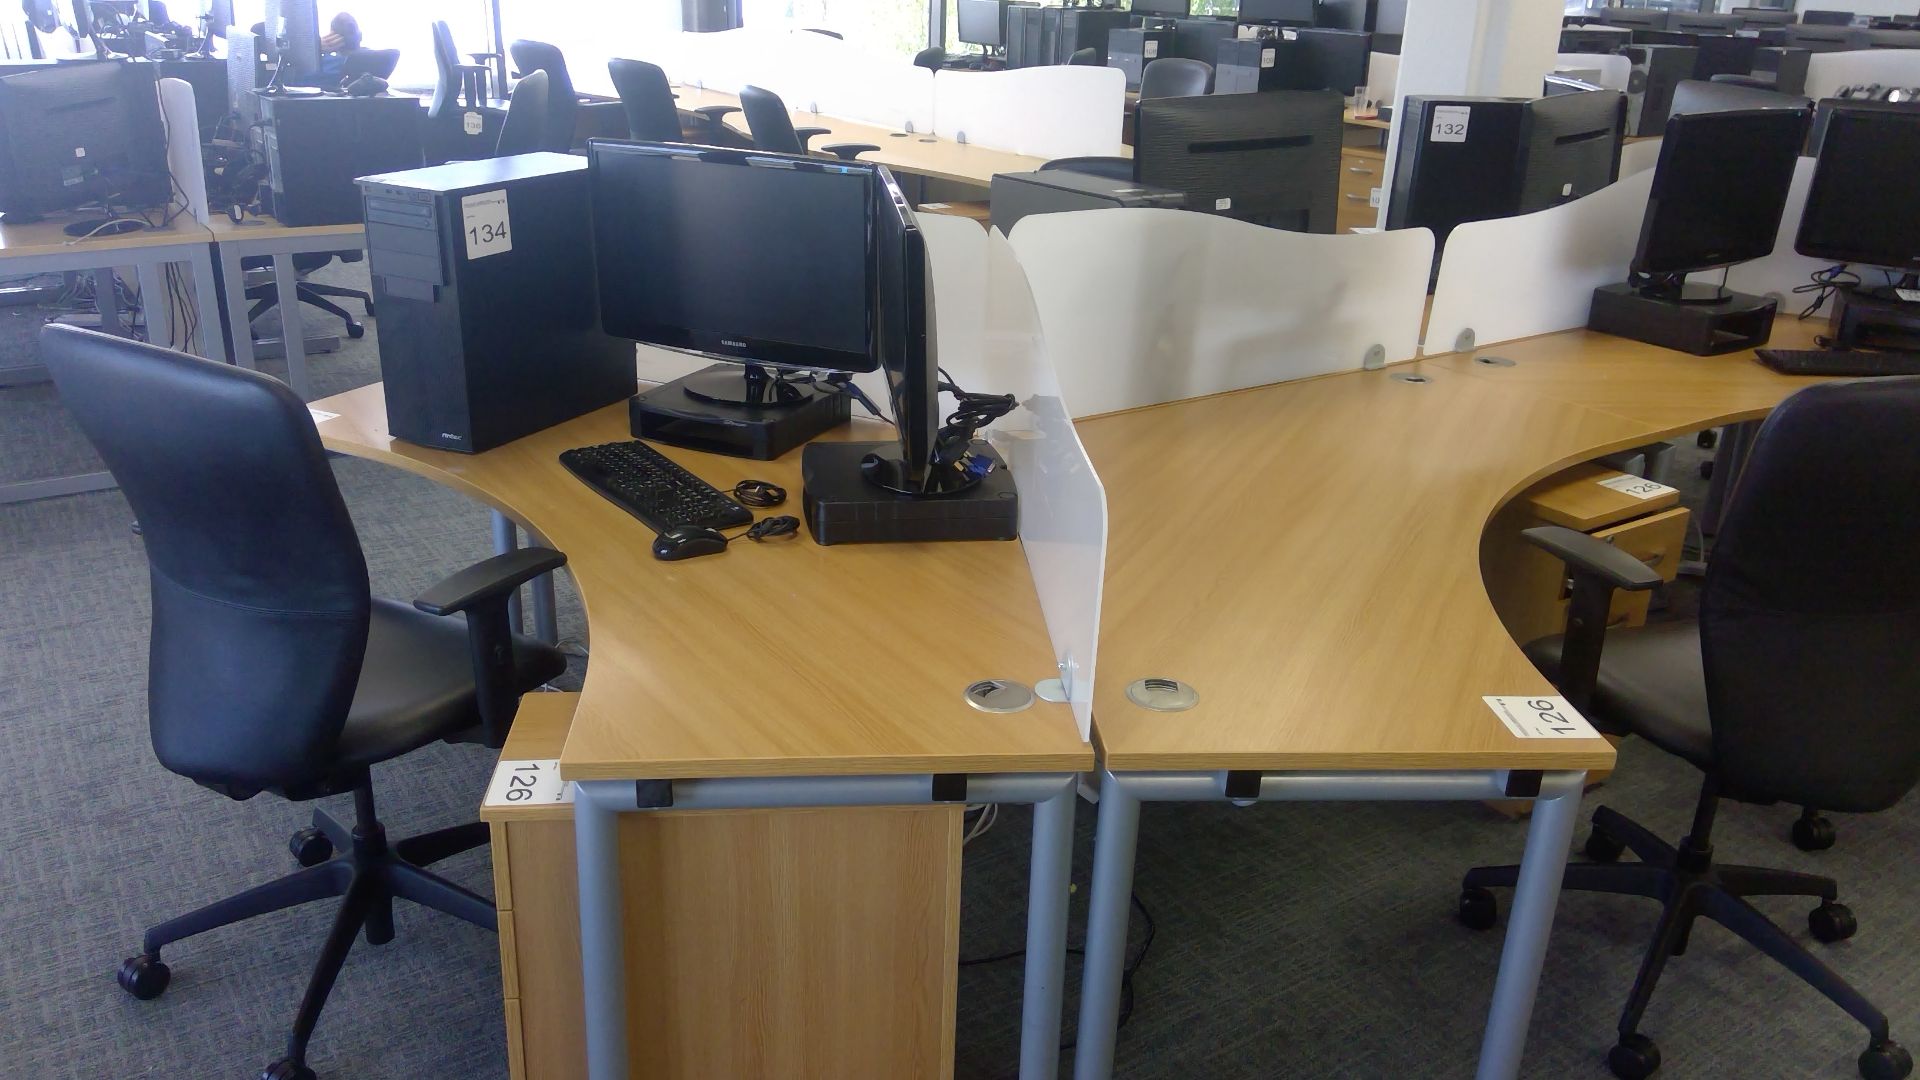 Oak effect 3 person desk cluster with opaque desk dividers, 3 drawer pedestals and 3 way adjustable - Image 2 of 2